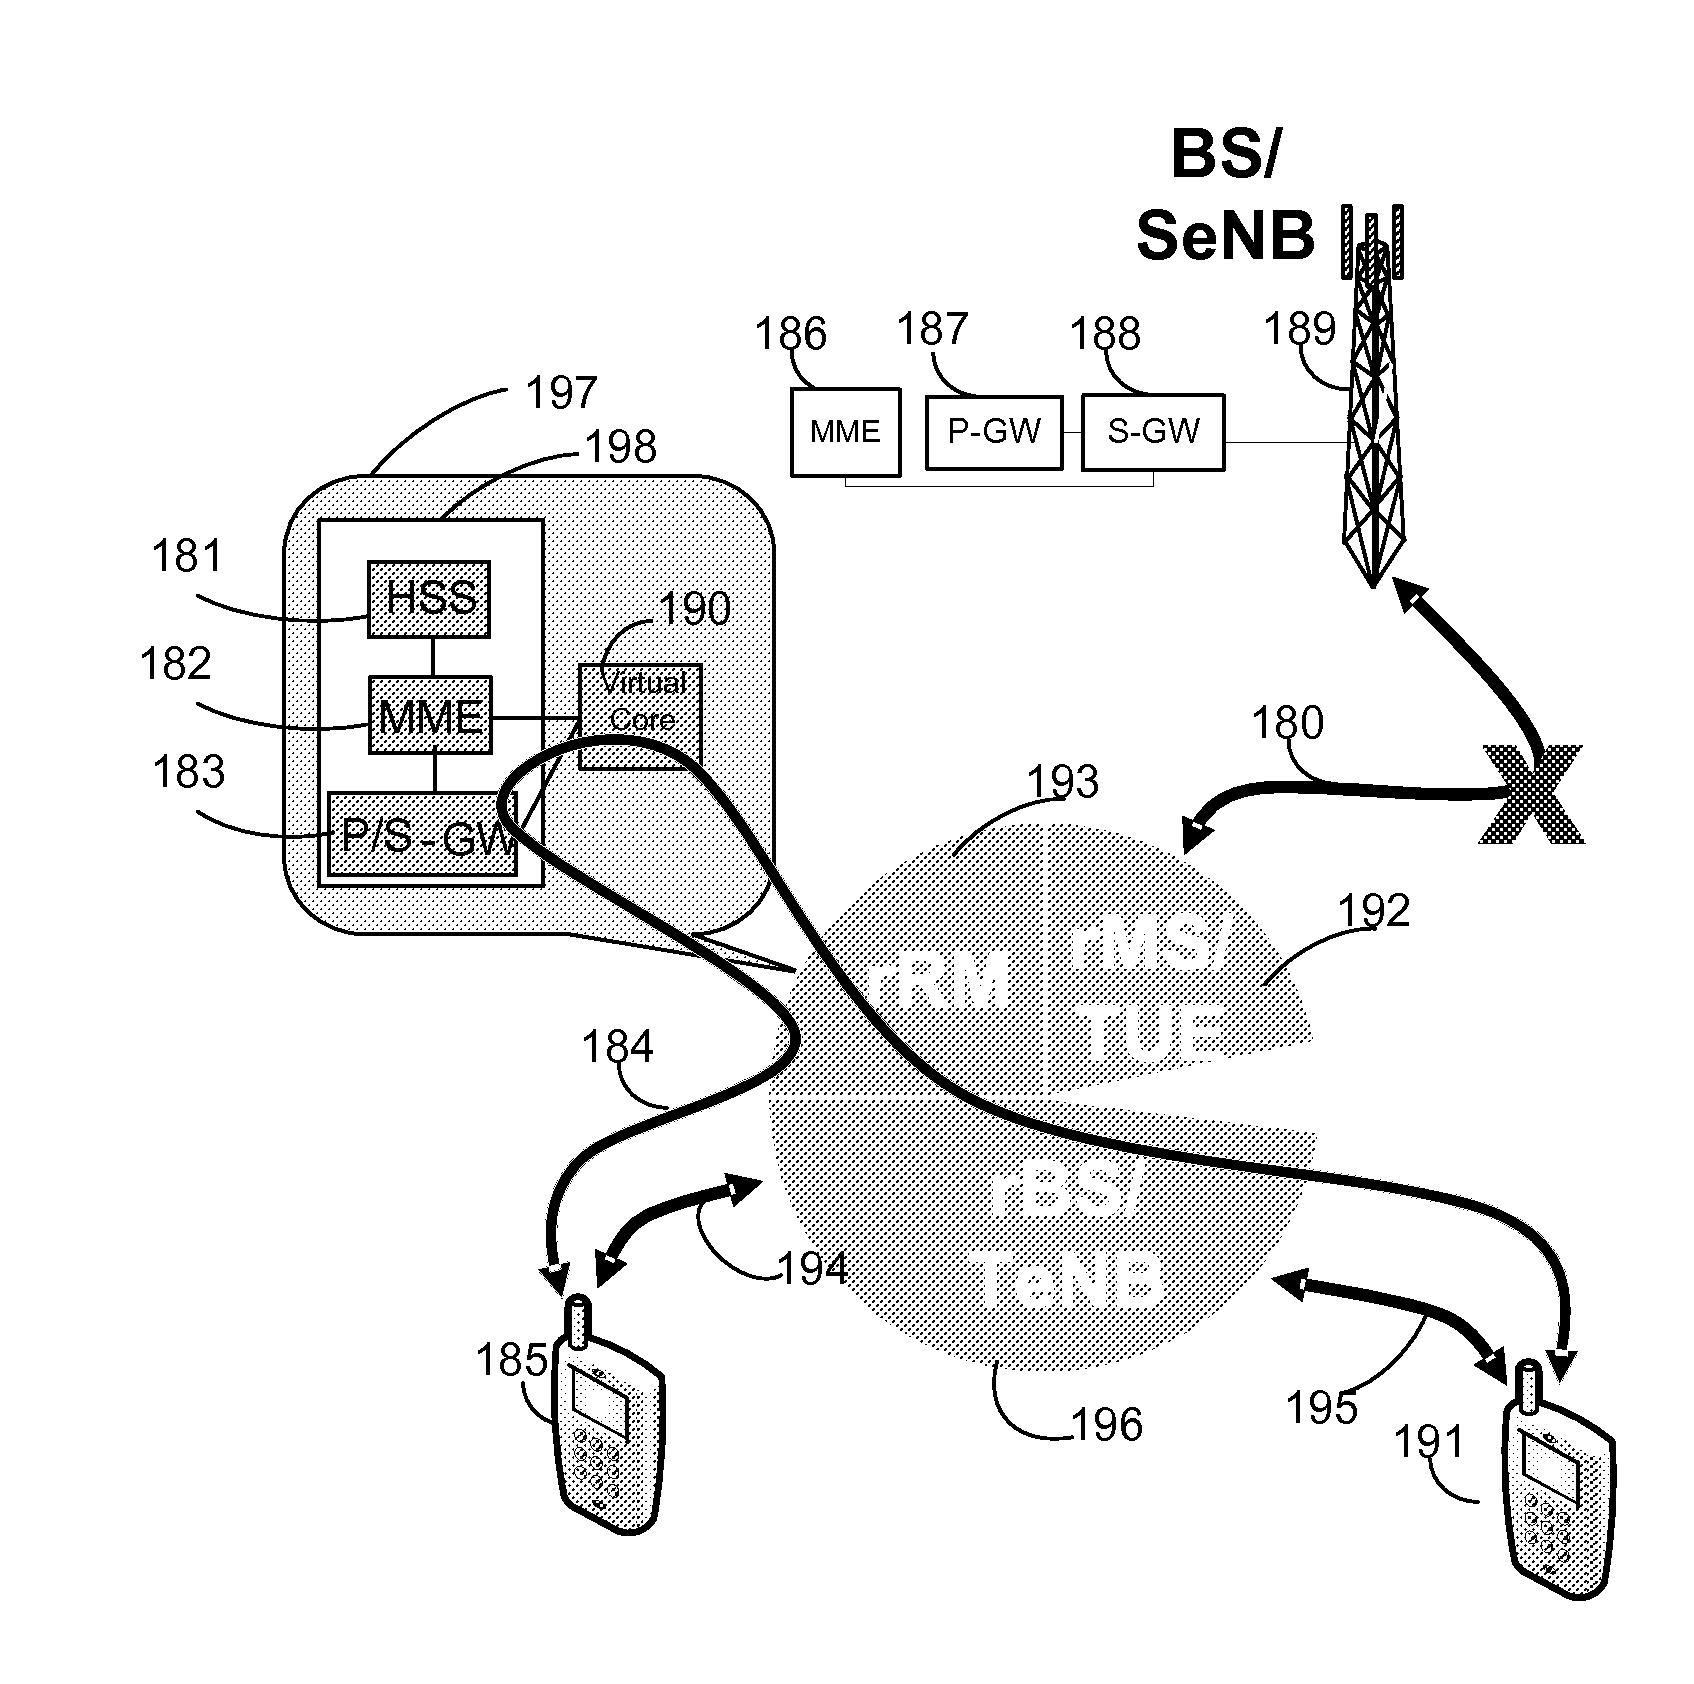 Moving cellular communication system operative in an emergency mode